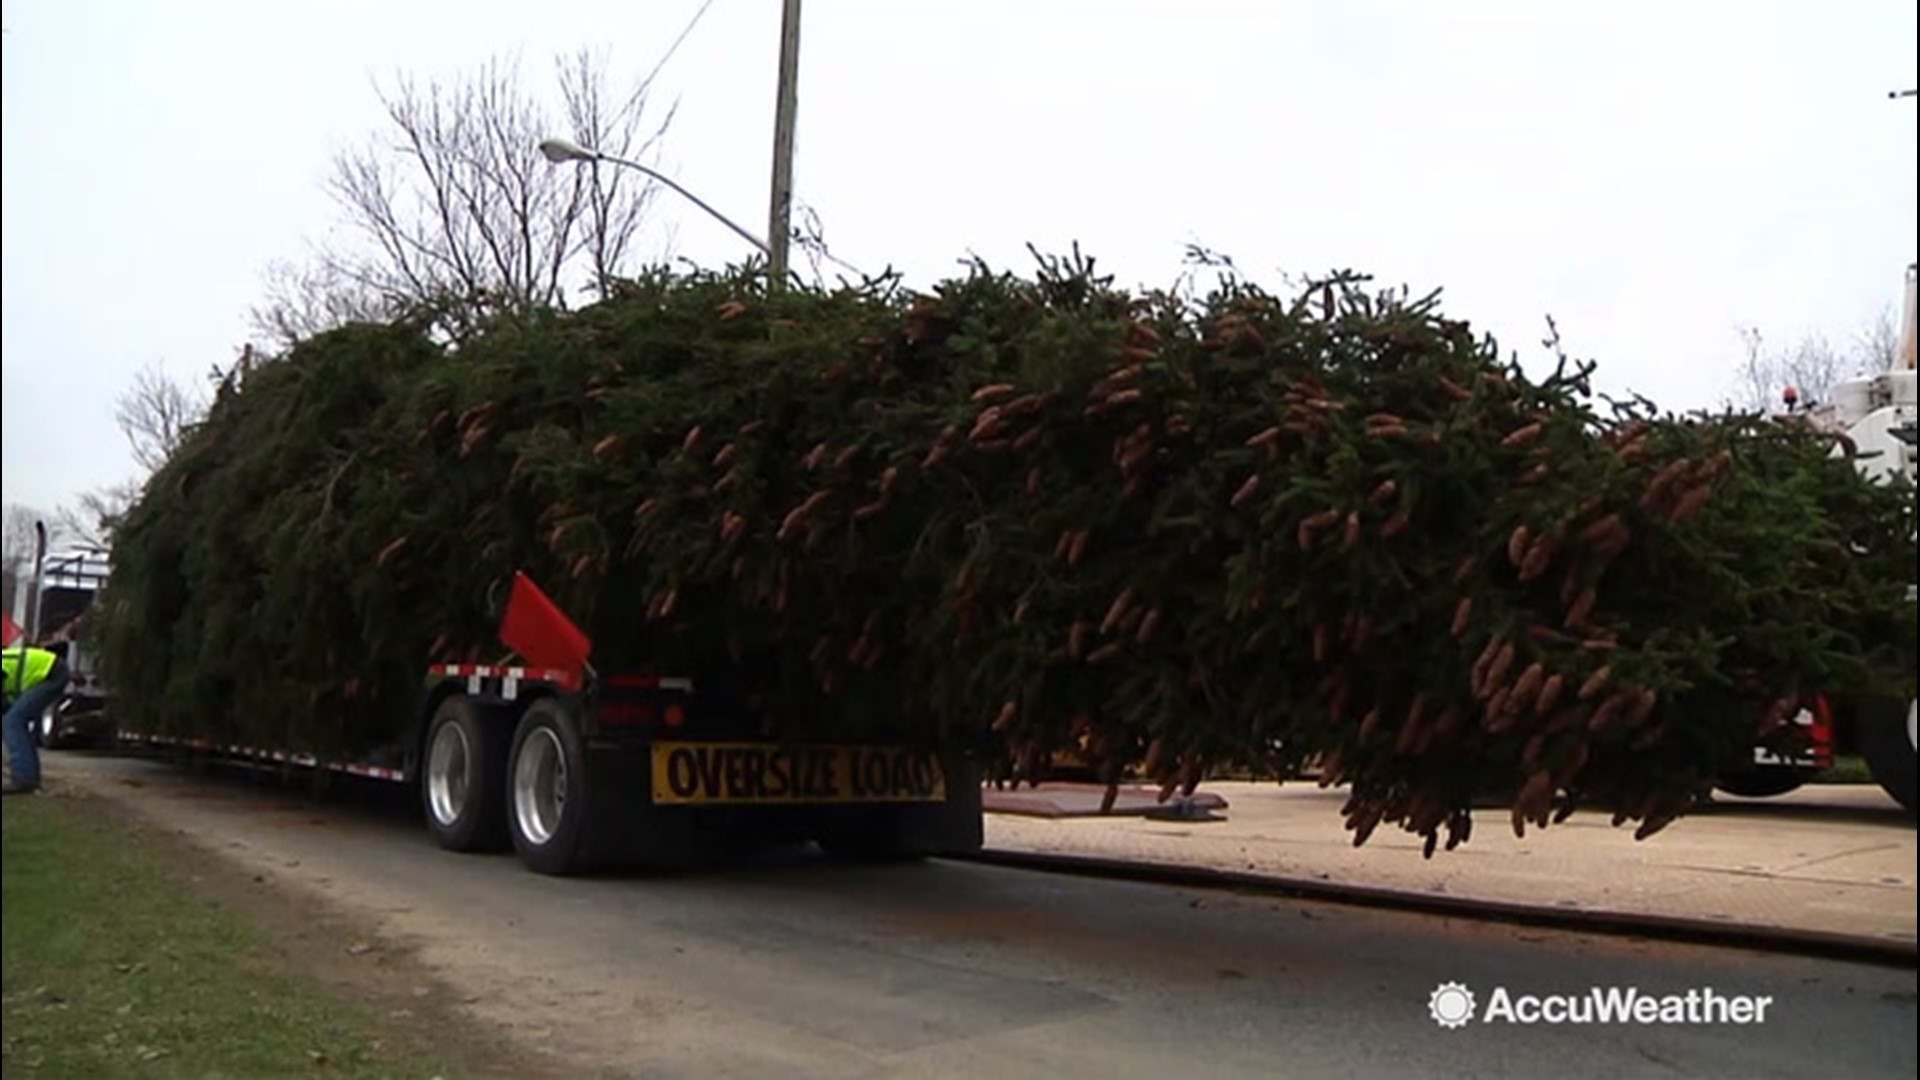 The tree that will be decorated and displayed in Rockefeller Center was just harvested on Nov. 7, in Florida, New York, and it is big to say the least.